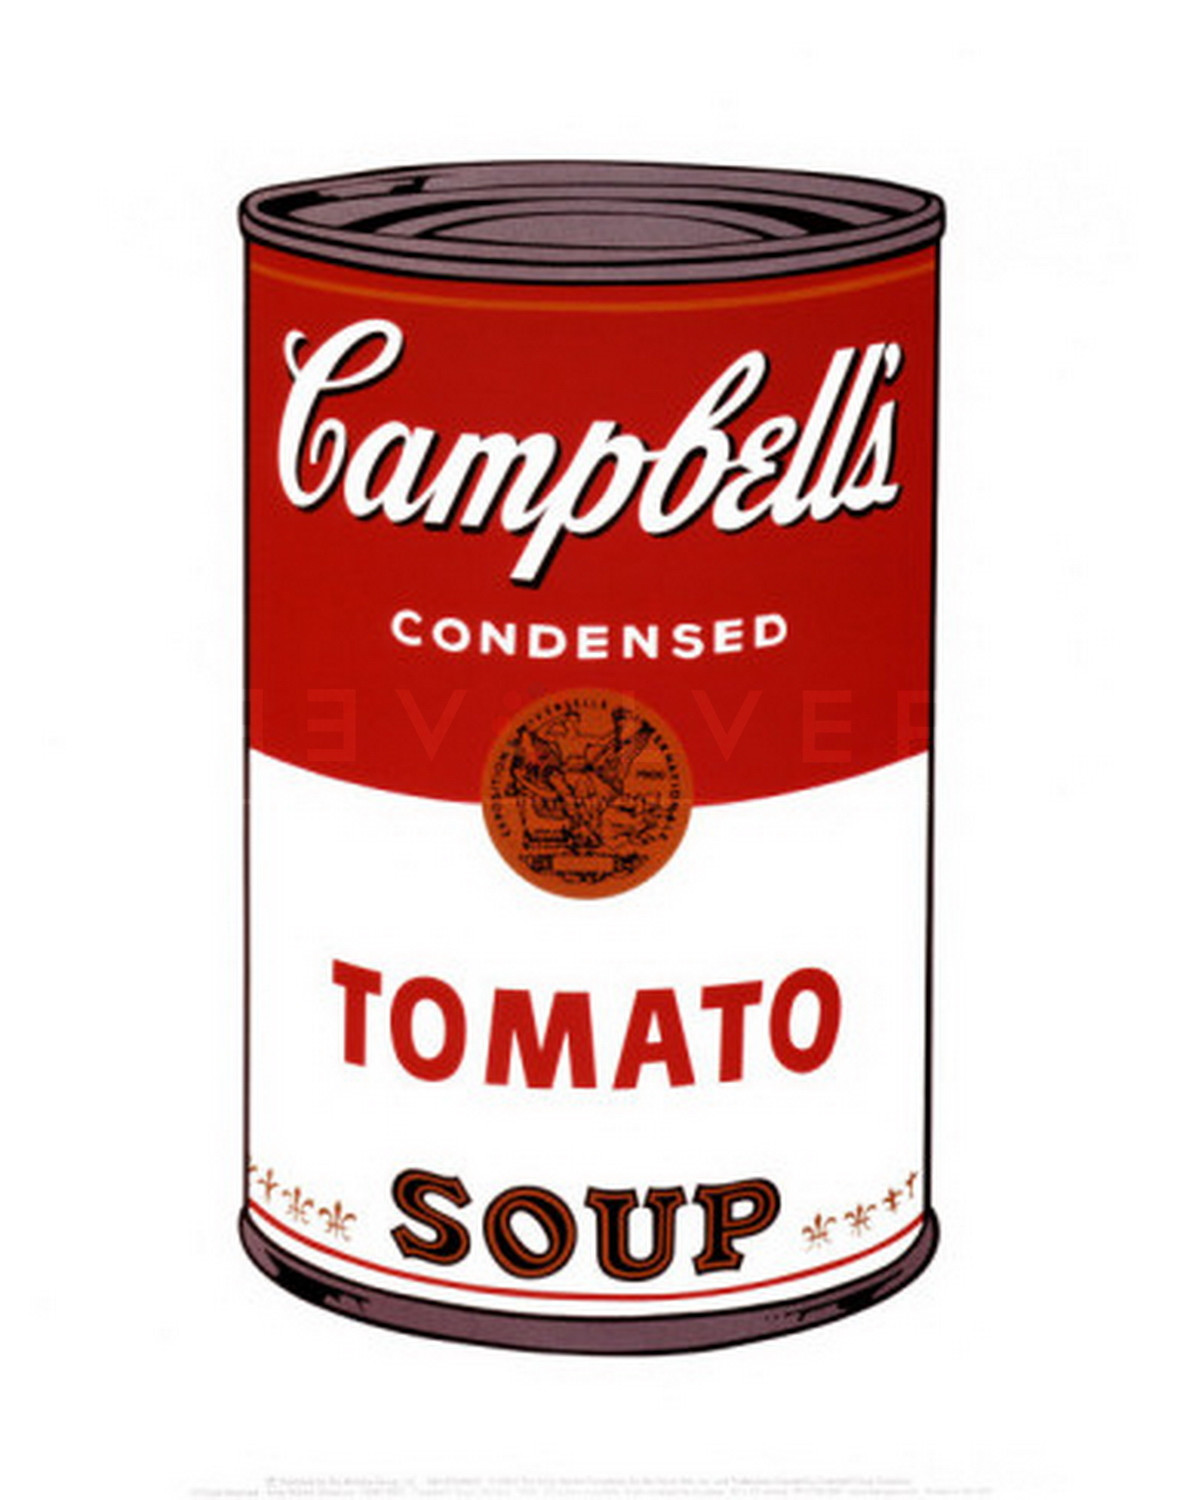 Tomato Soup Can
 Campbell’s Soup I Tomato Soup 46 Andy Warhol